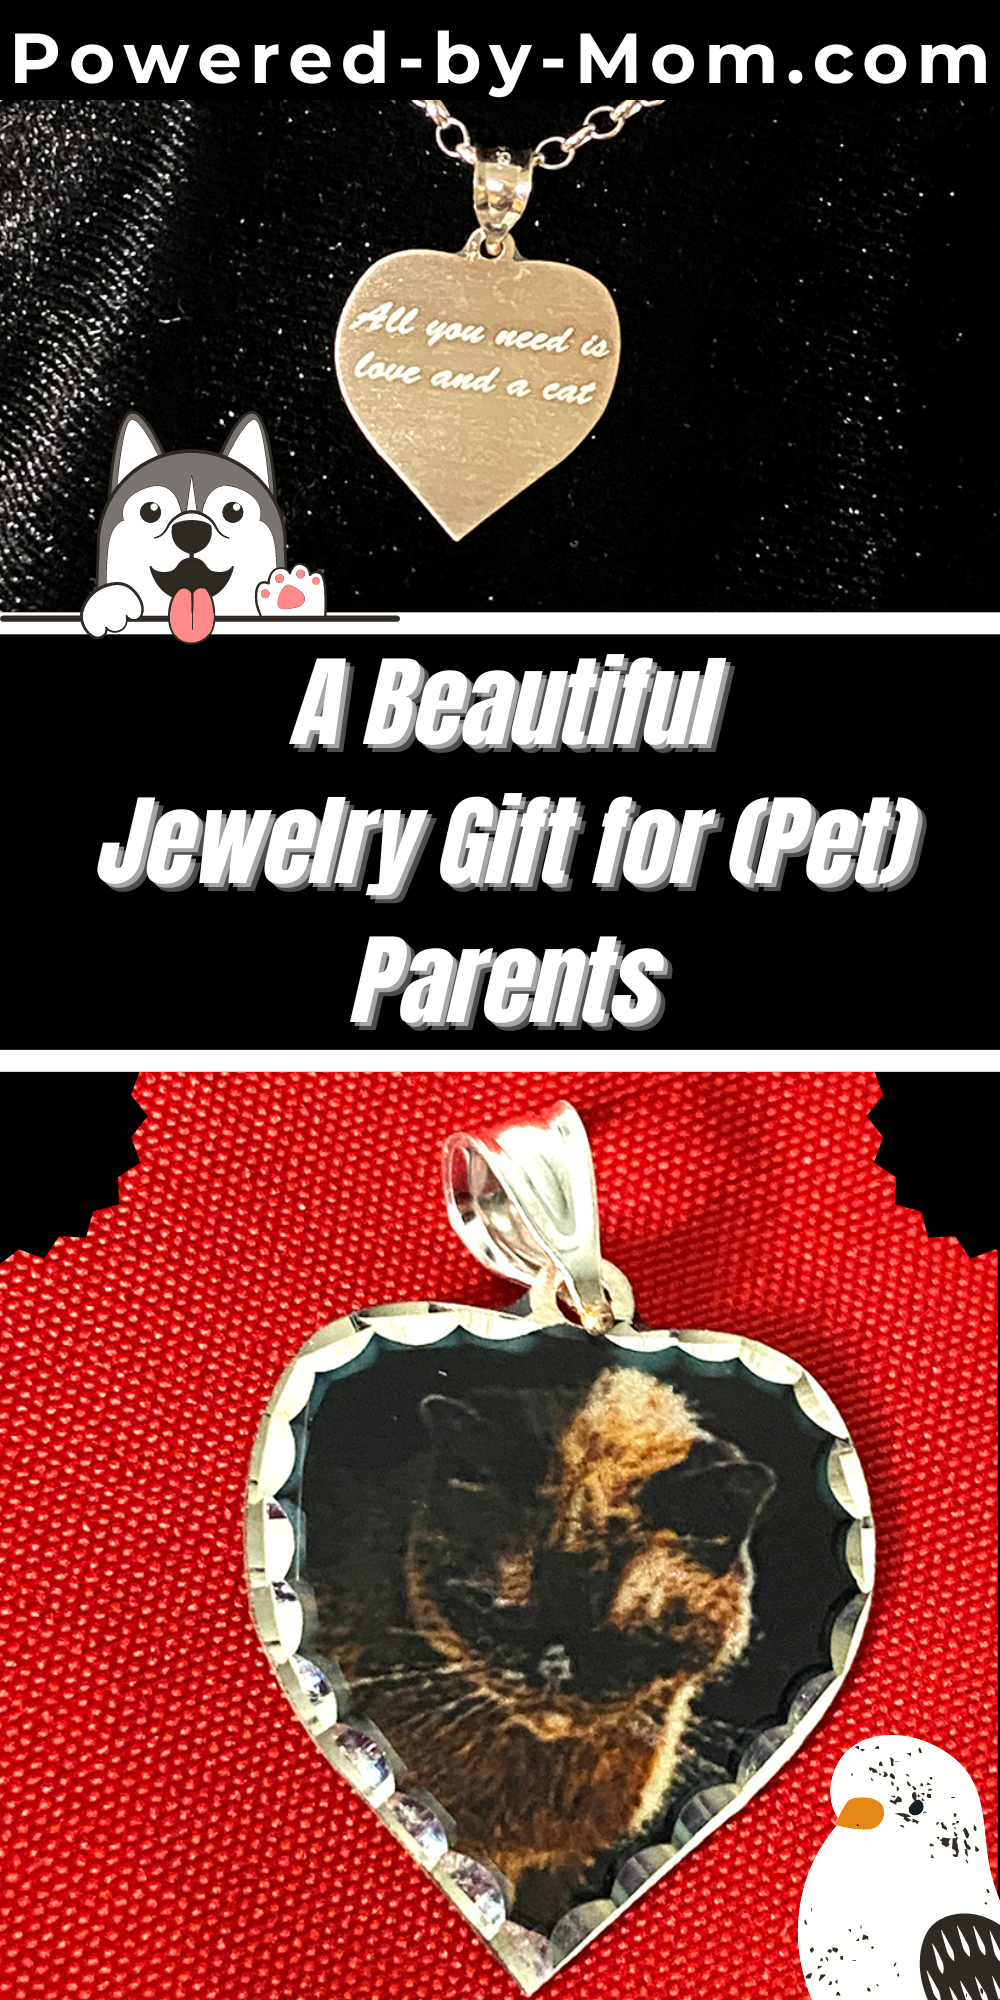 No matter who or what you want to feature, you can do it with stunning beauty on this fully customizable jewelry gift. 